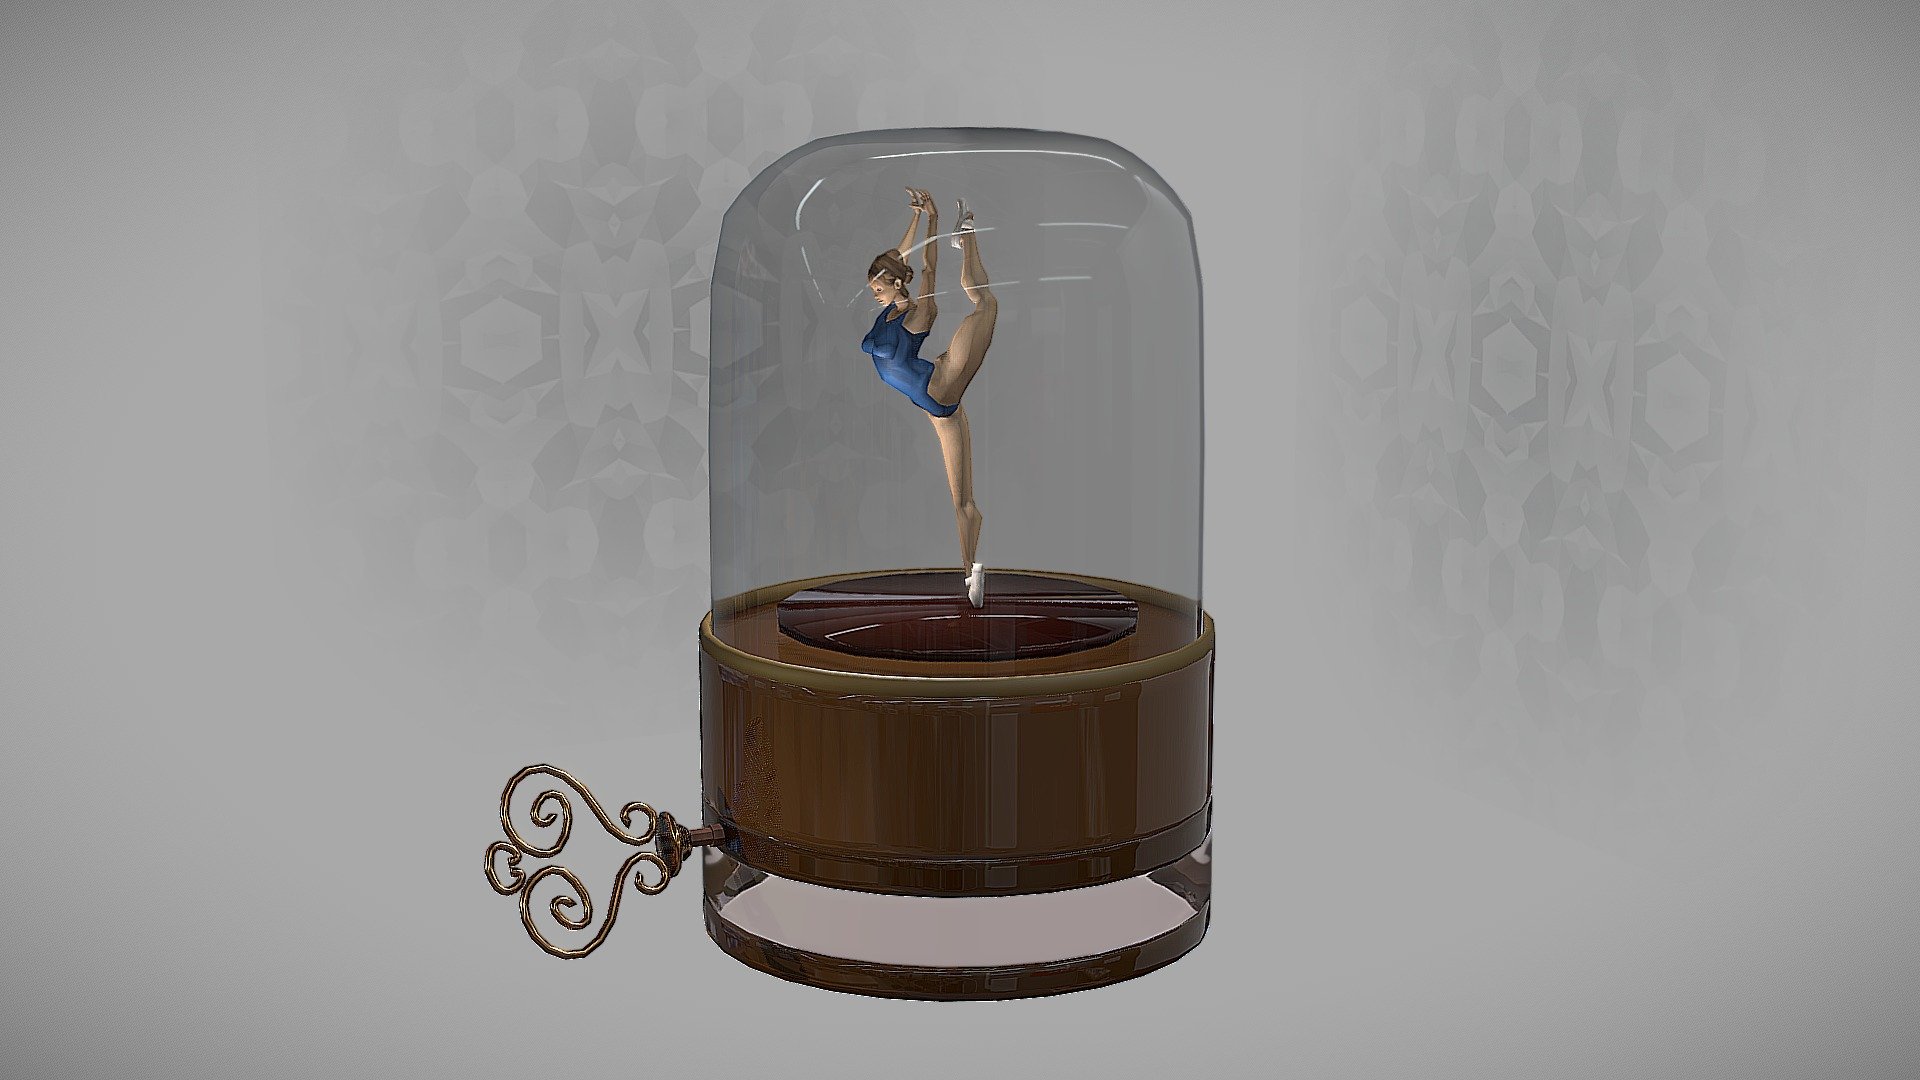 No Textures. Software: Blender.
I tried the cool new feature &lsquo;SSR'. Go close to the surface and you see nice little reflections. Cool stuff! Thumbs up Sketchfab.

For my little Linchen - Ballerina Music Box - 3D model by Chromasie 3d model